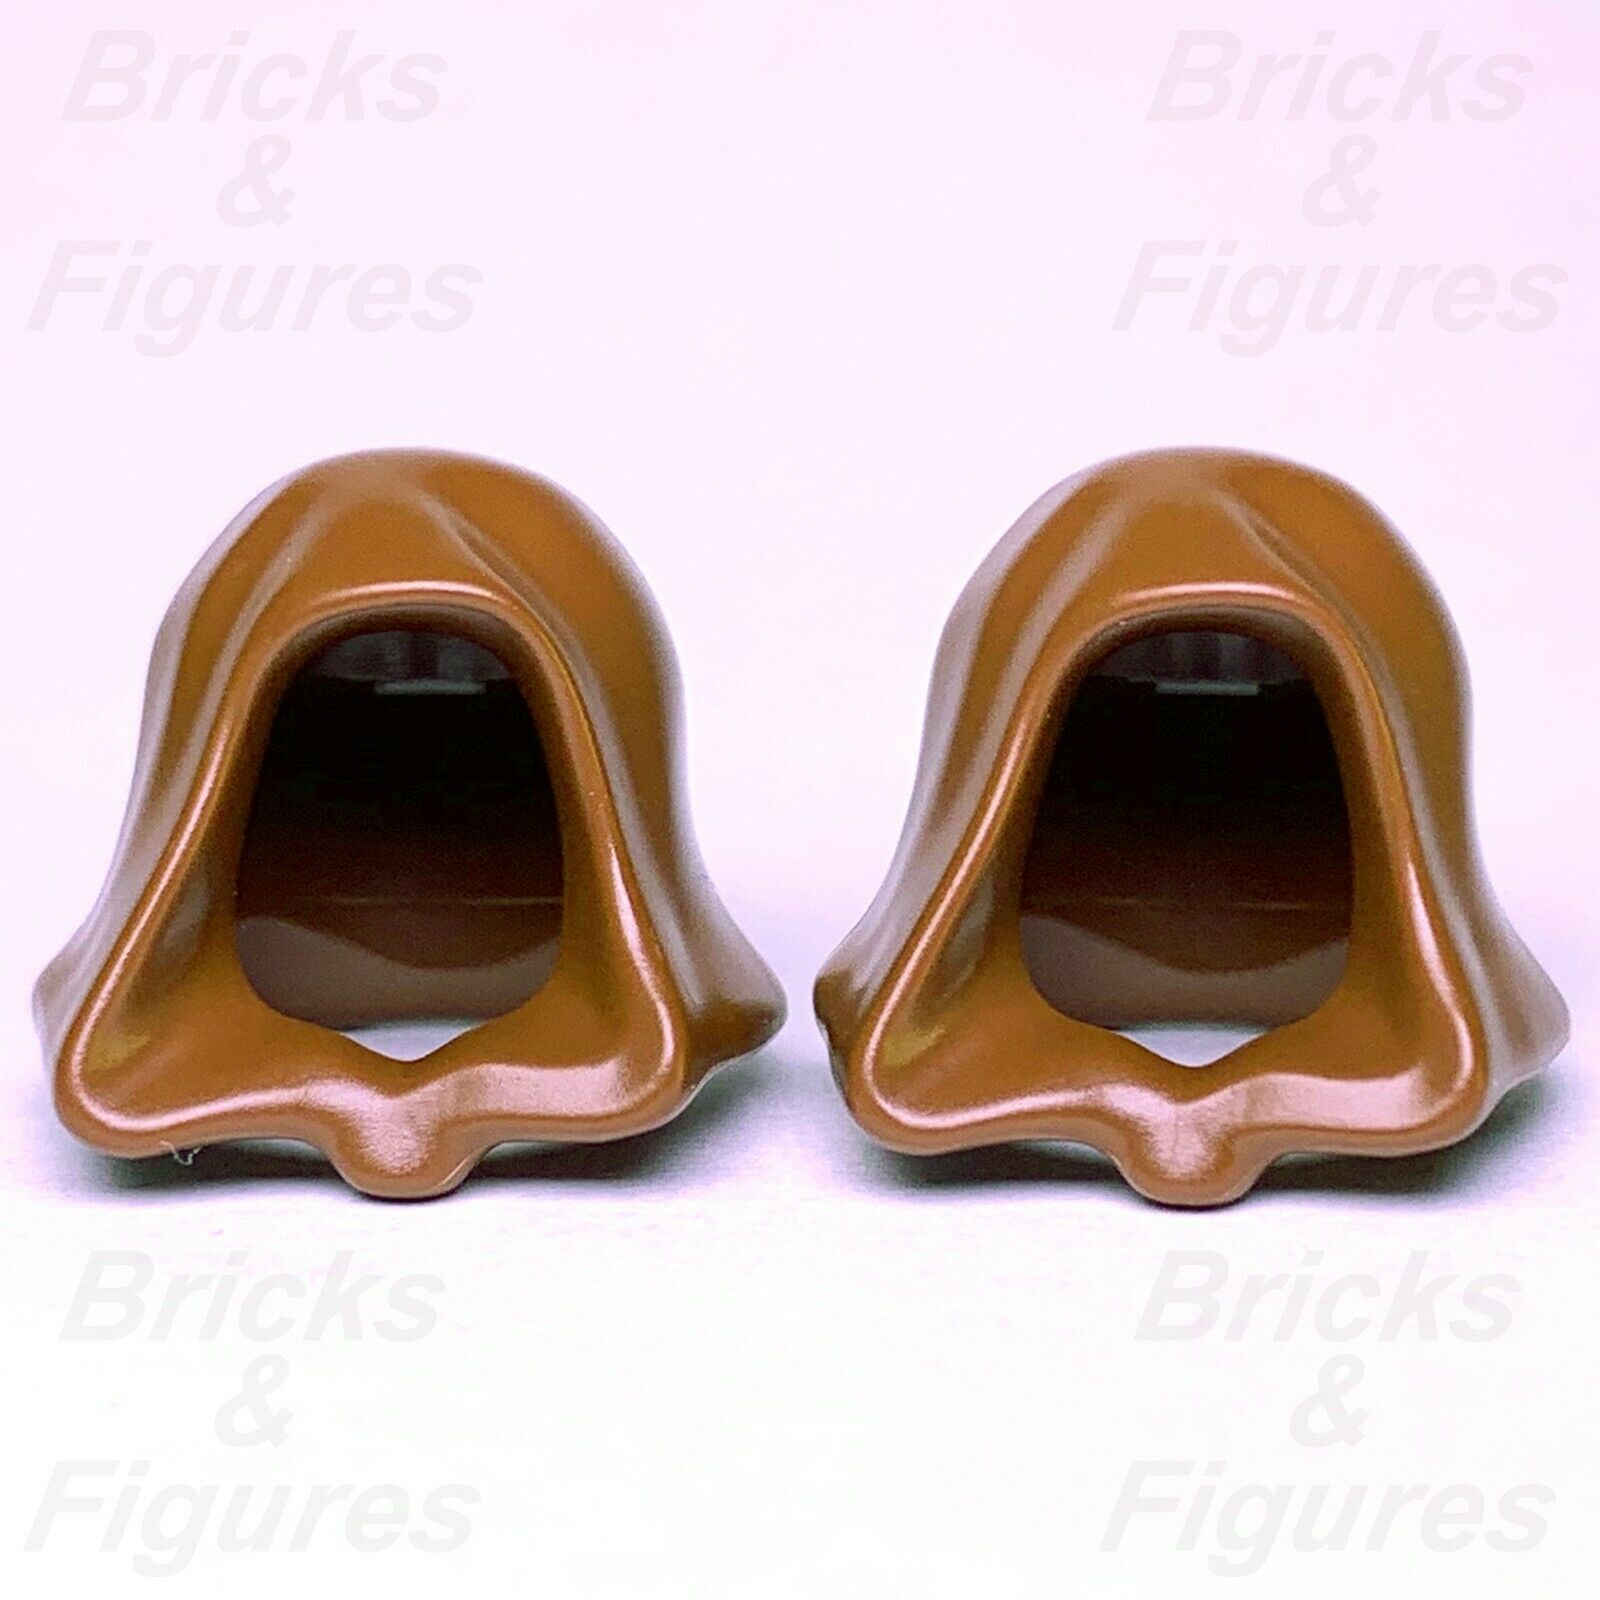 2 x Star Wars LEGO Brown Robe Hoods for Sith Lord & Jedi Minifigs Genuine Parts - Bricks & Figures